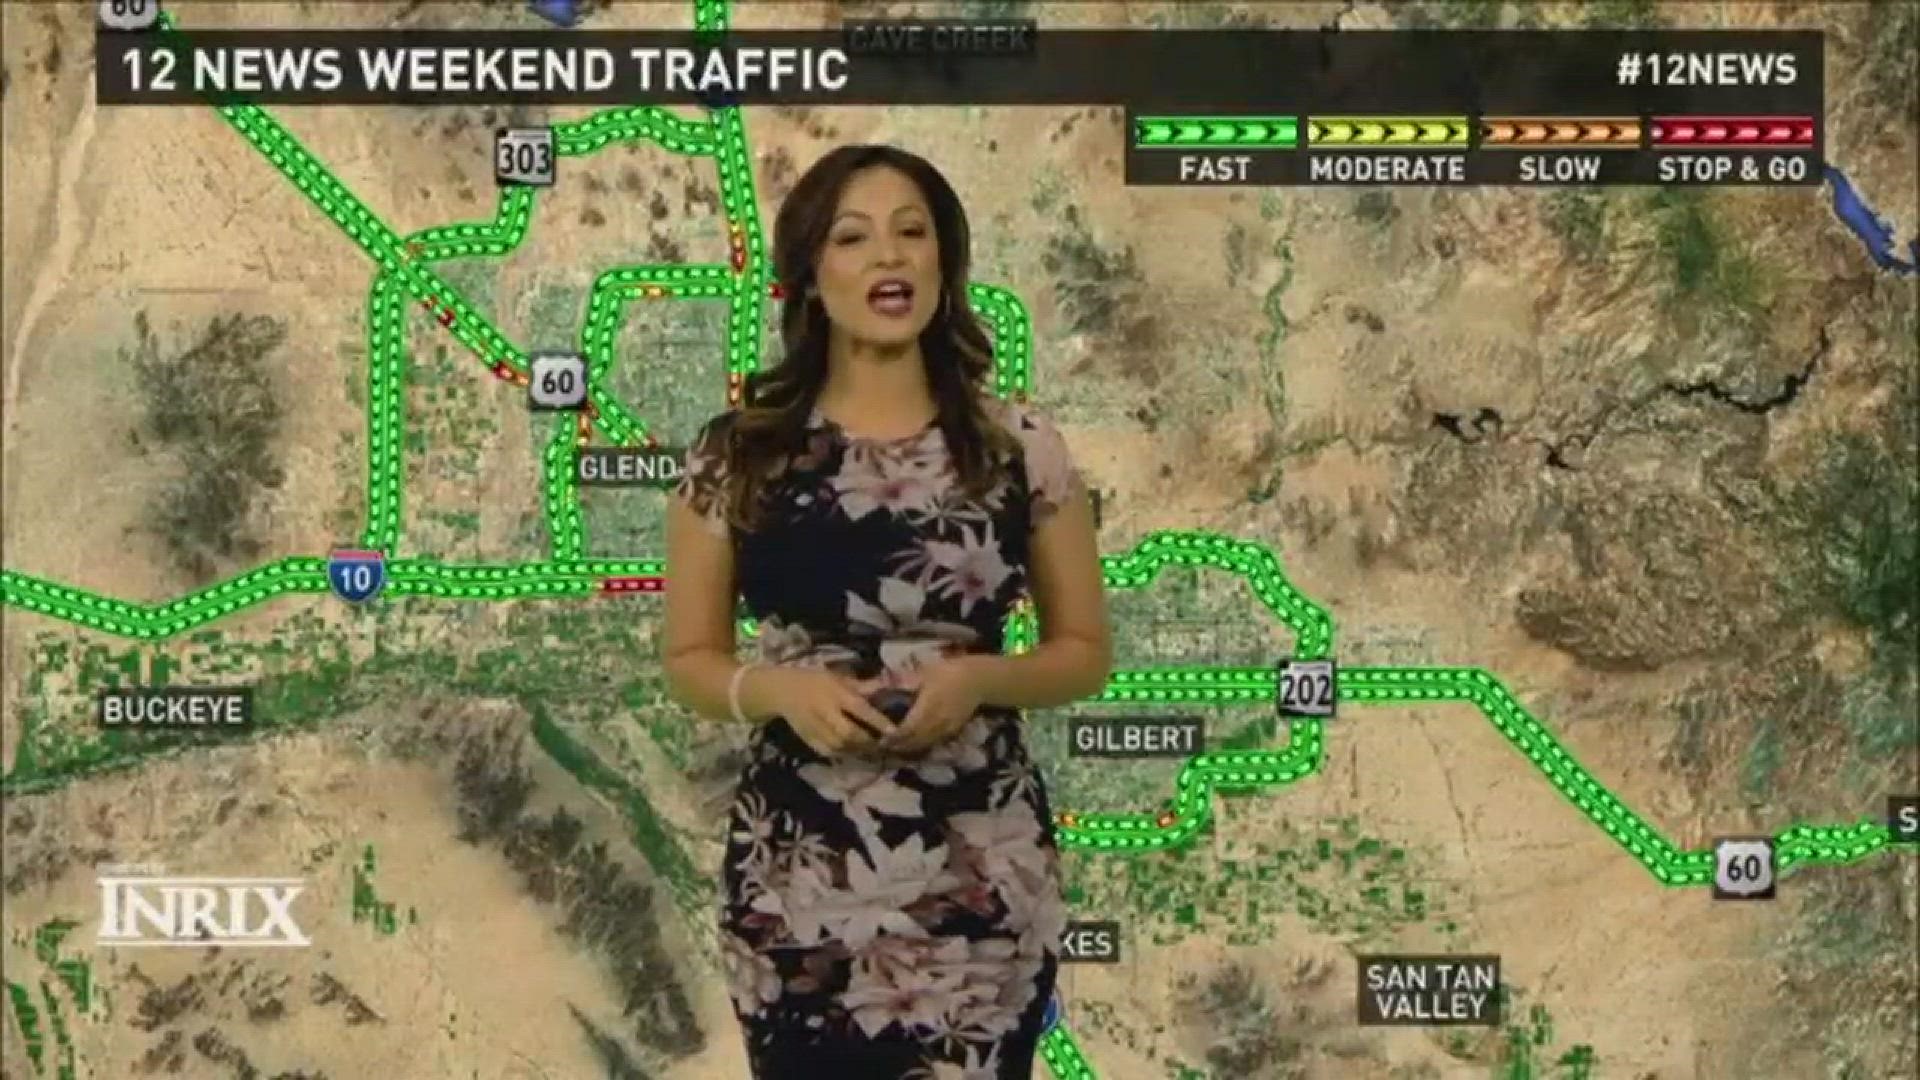 Commuters will deal with a few freeway closures and restriction this weekend.